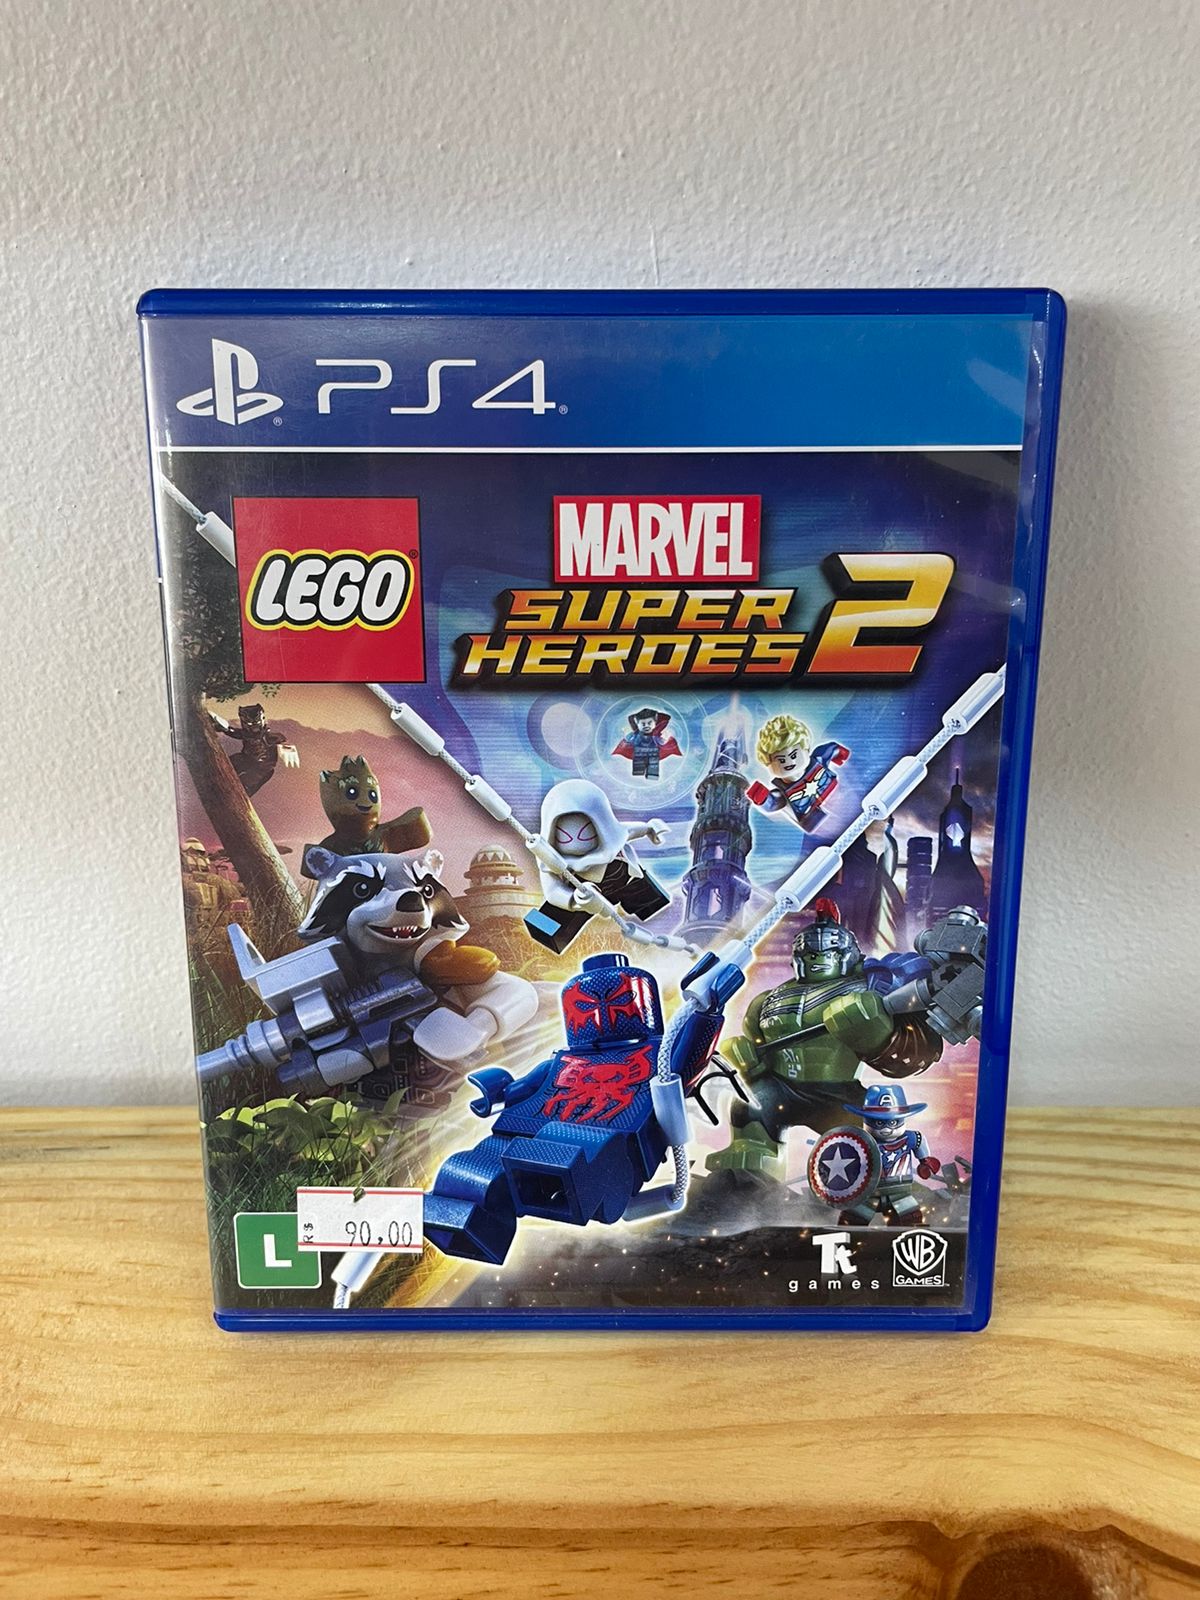 LEGO Marvel Super Heroes and LEGO Marvel Super Heroes 2 PS4